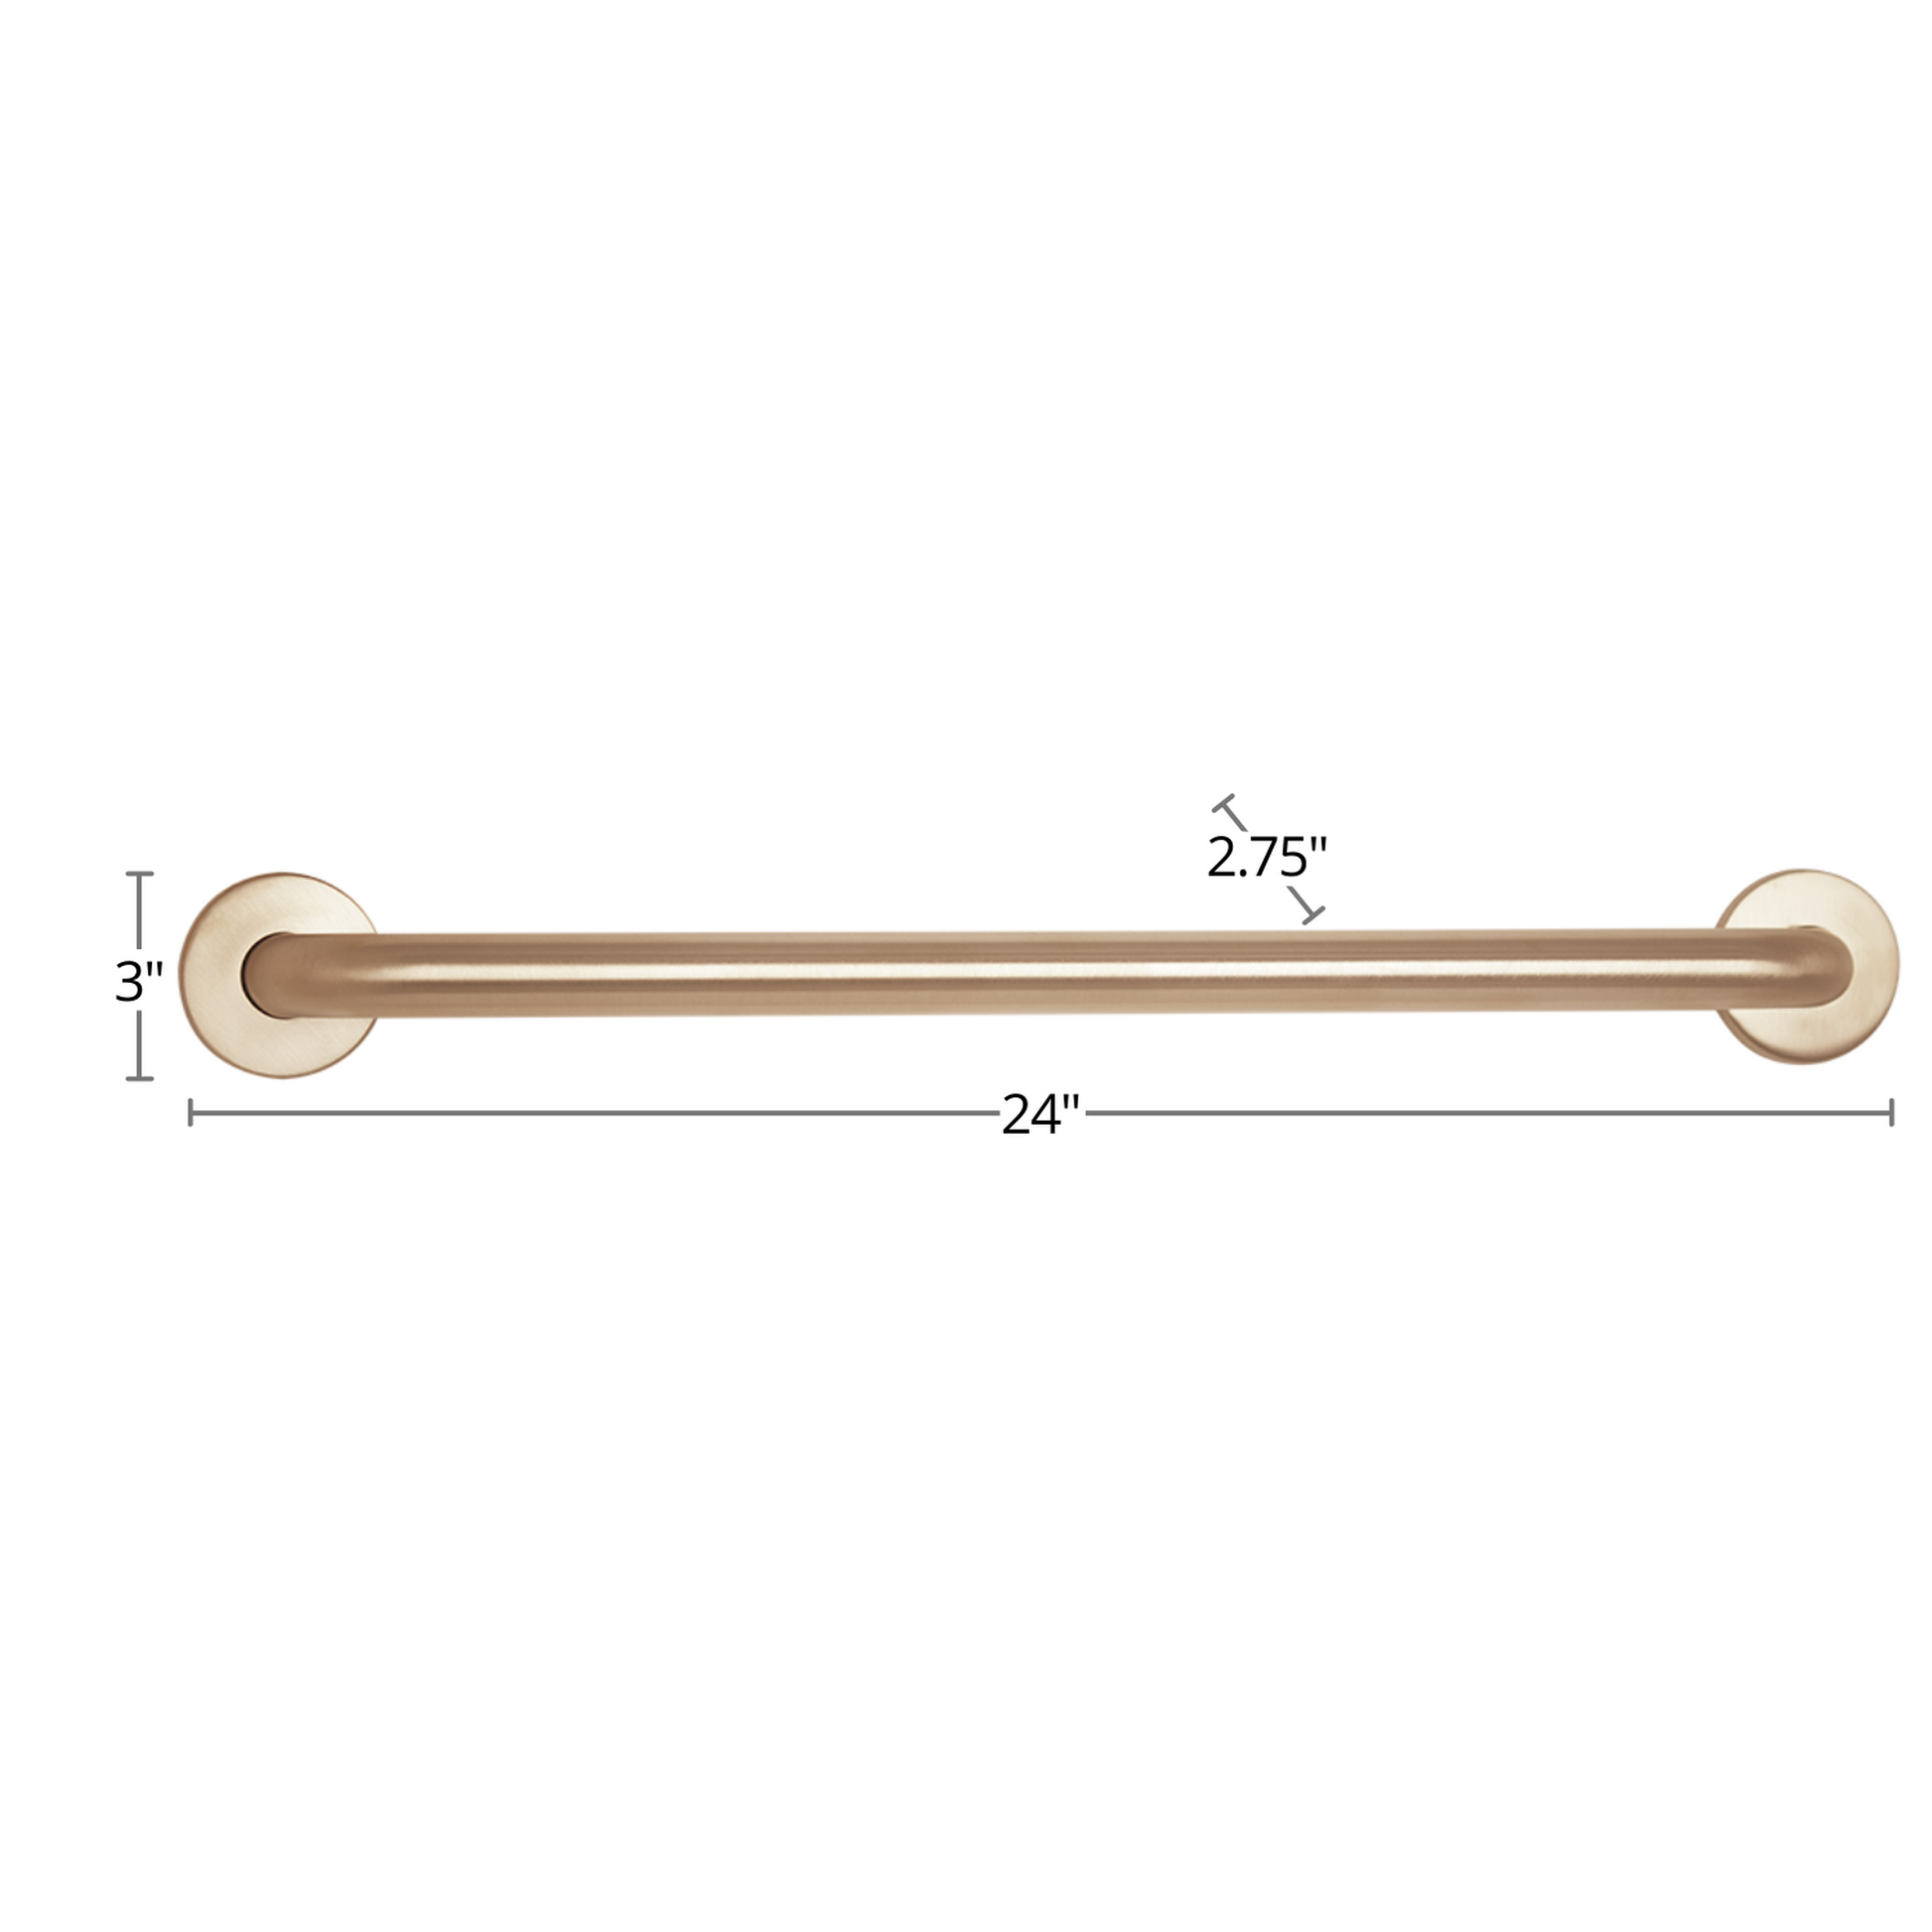 Seachrome Signature Series CuVerro 24" Antimicrobial Copper Alloy 1.5" Bar Diameter Concealed Flange Straight Grab Bar